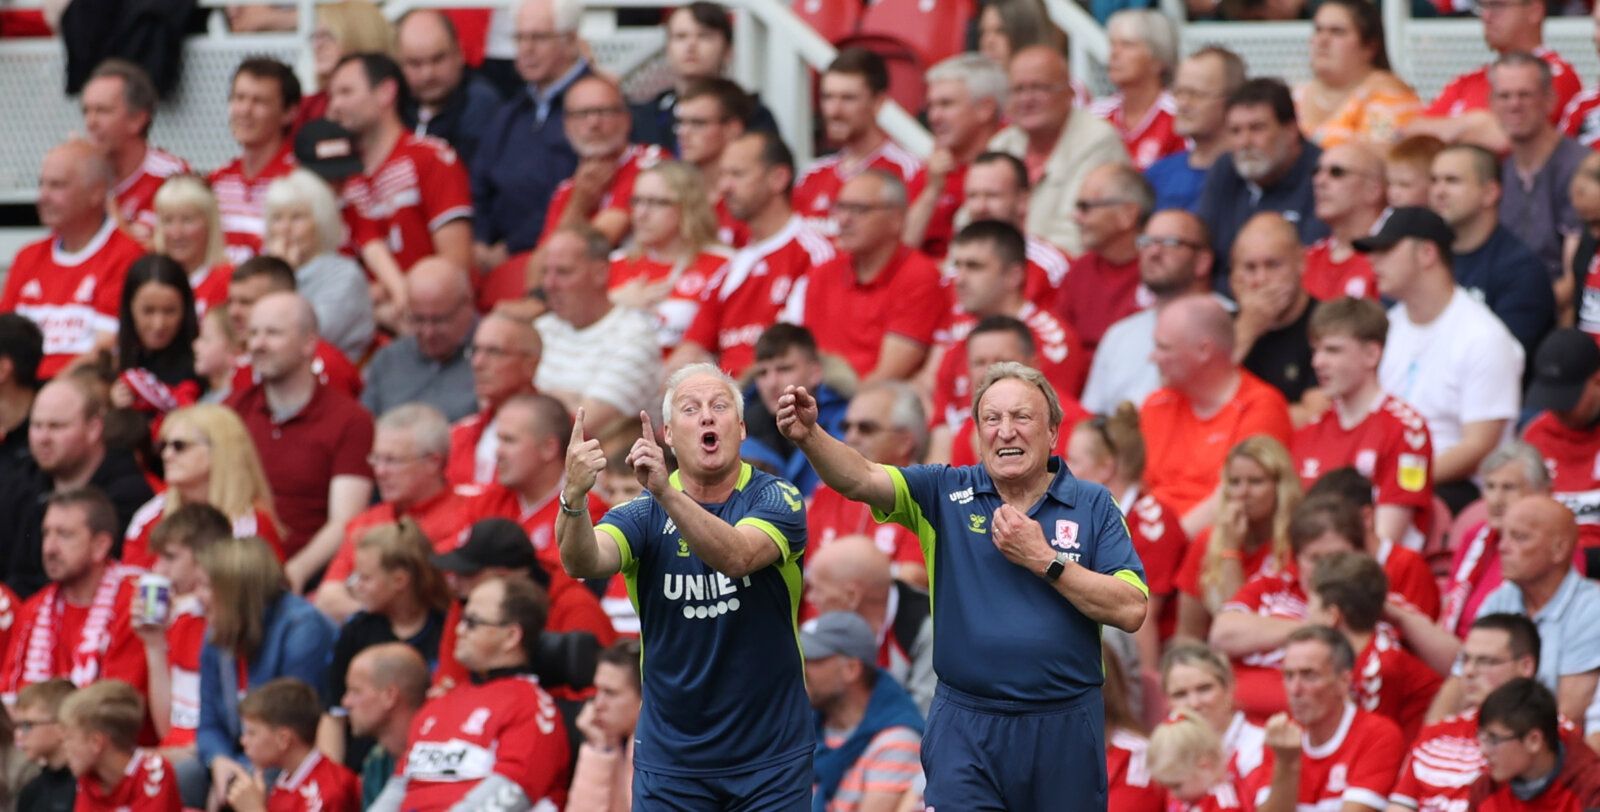 Soccer Football - Championship - Middlesbrough v Bristol City - Riverside Stadium, Middlesbrough, Britain - August 14, 2021 Middlesbrough's manager Neil Warnock and his assistant manager Kevin Blackwell react Action Images/Lee Smith EDITORIAL USE ONLY. No use with unauthorized audio, video, data, fixture lists, club/league logos or 'live' services. Online in-match use limited to 75 images, no video emulation. No use in betting, games or single club /league/player publications.  Please contact yo